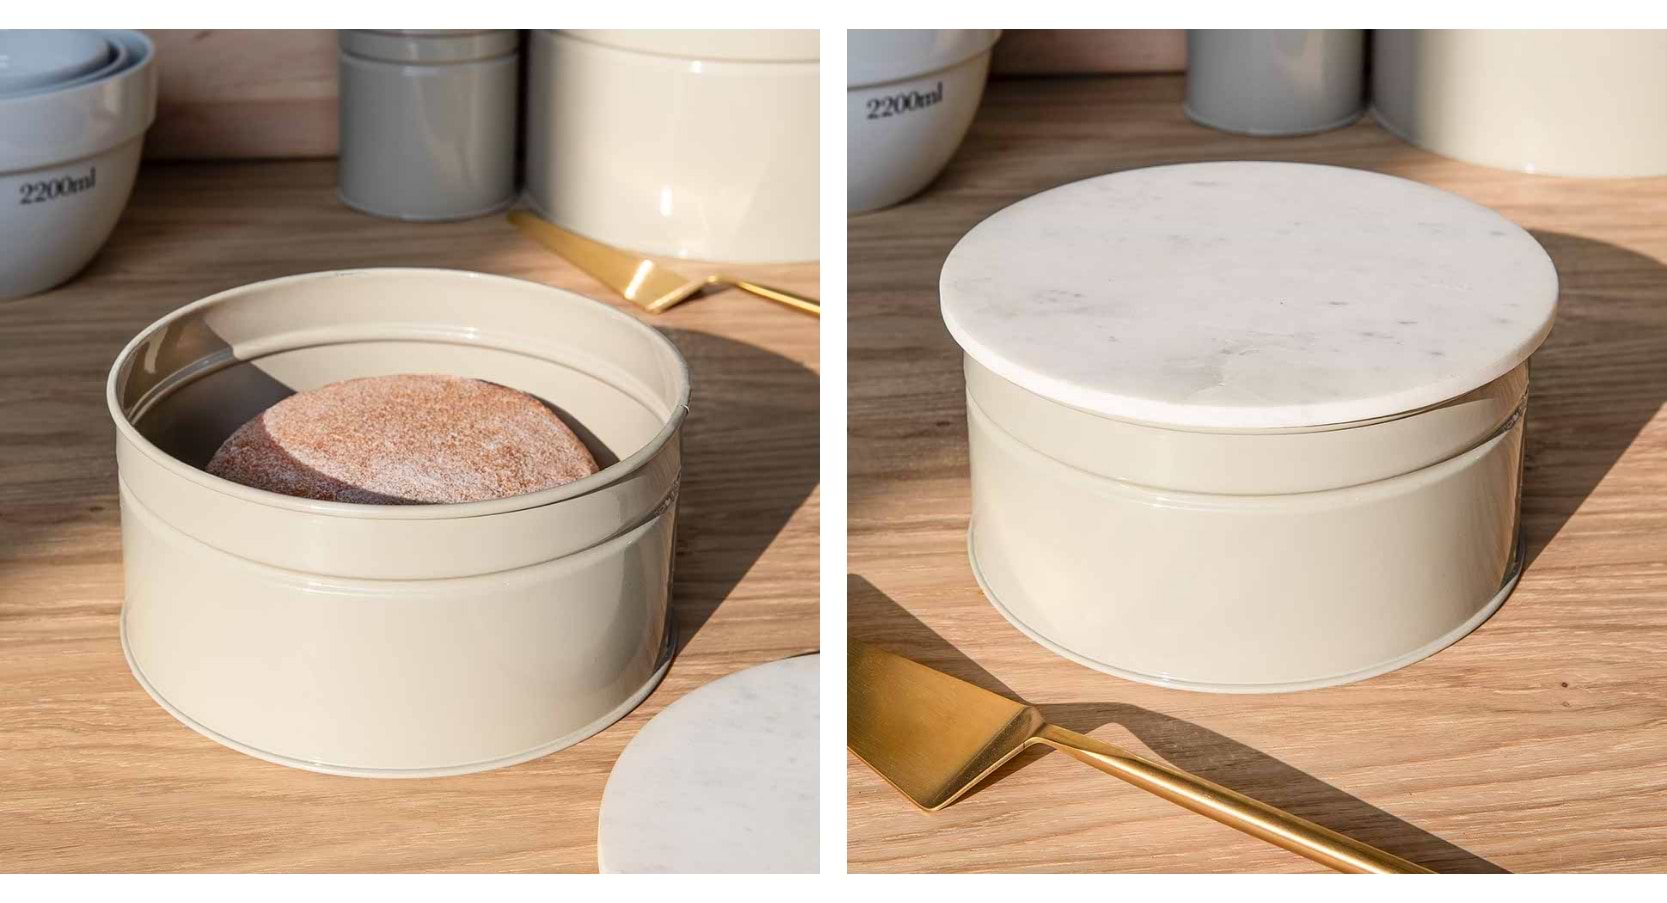 Brompton Cake Tin in clay colour with a grey-flecked marble lid, shown in an elegant kitchen setting.